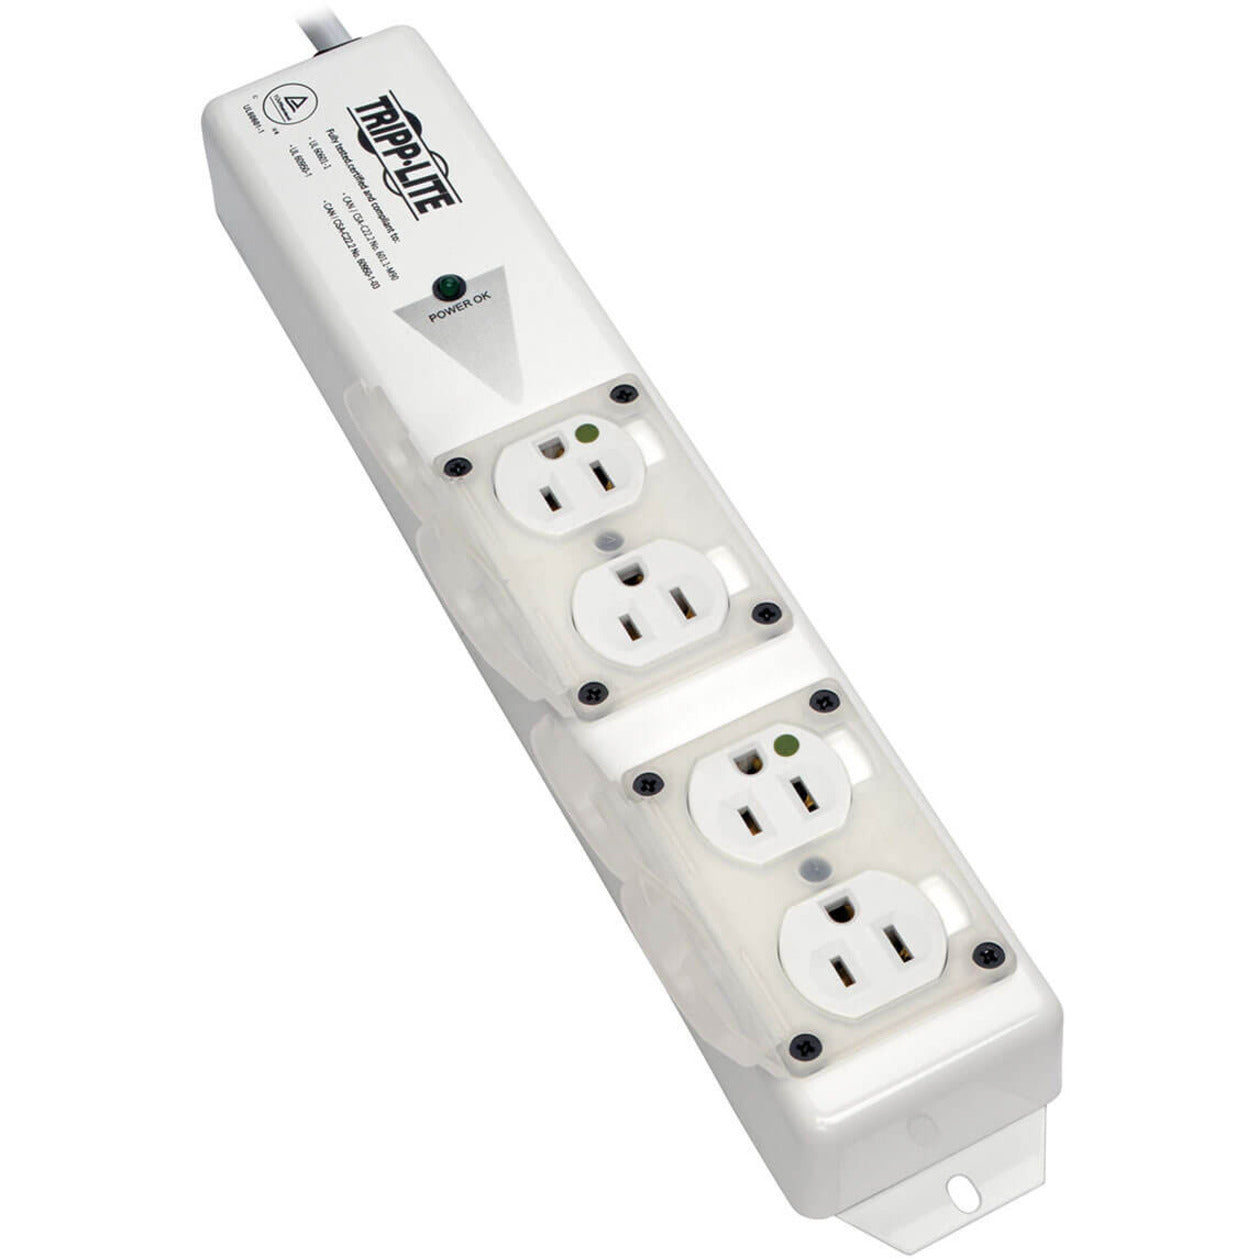 Tripp Lite Safe-IT UL 60601-1 Medical-Grade Power Strip for Patient-Care Vicinity 4x 15A Hospital-Grade Outlets Safety Covers 6 ft. Cord